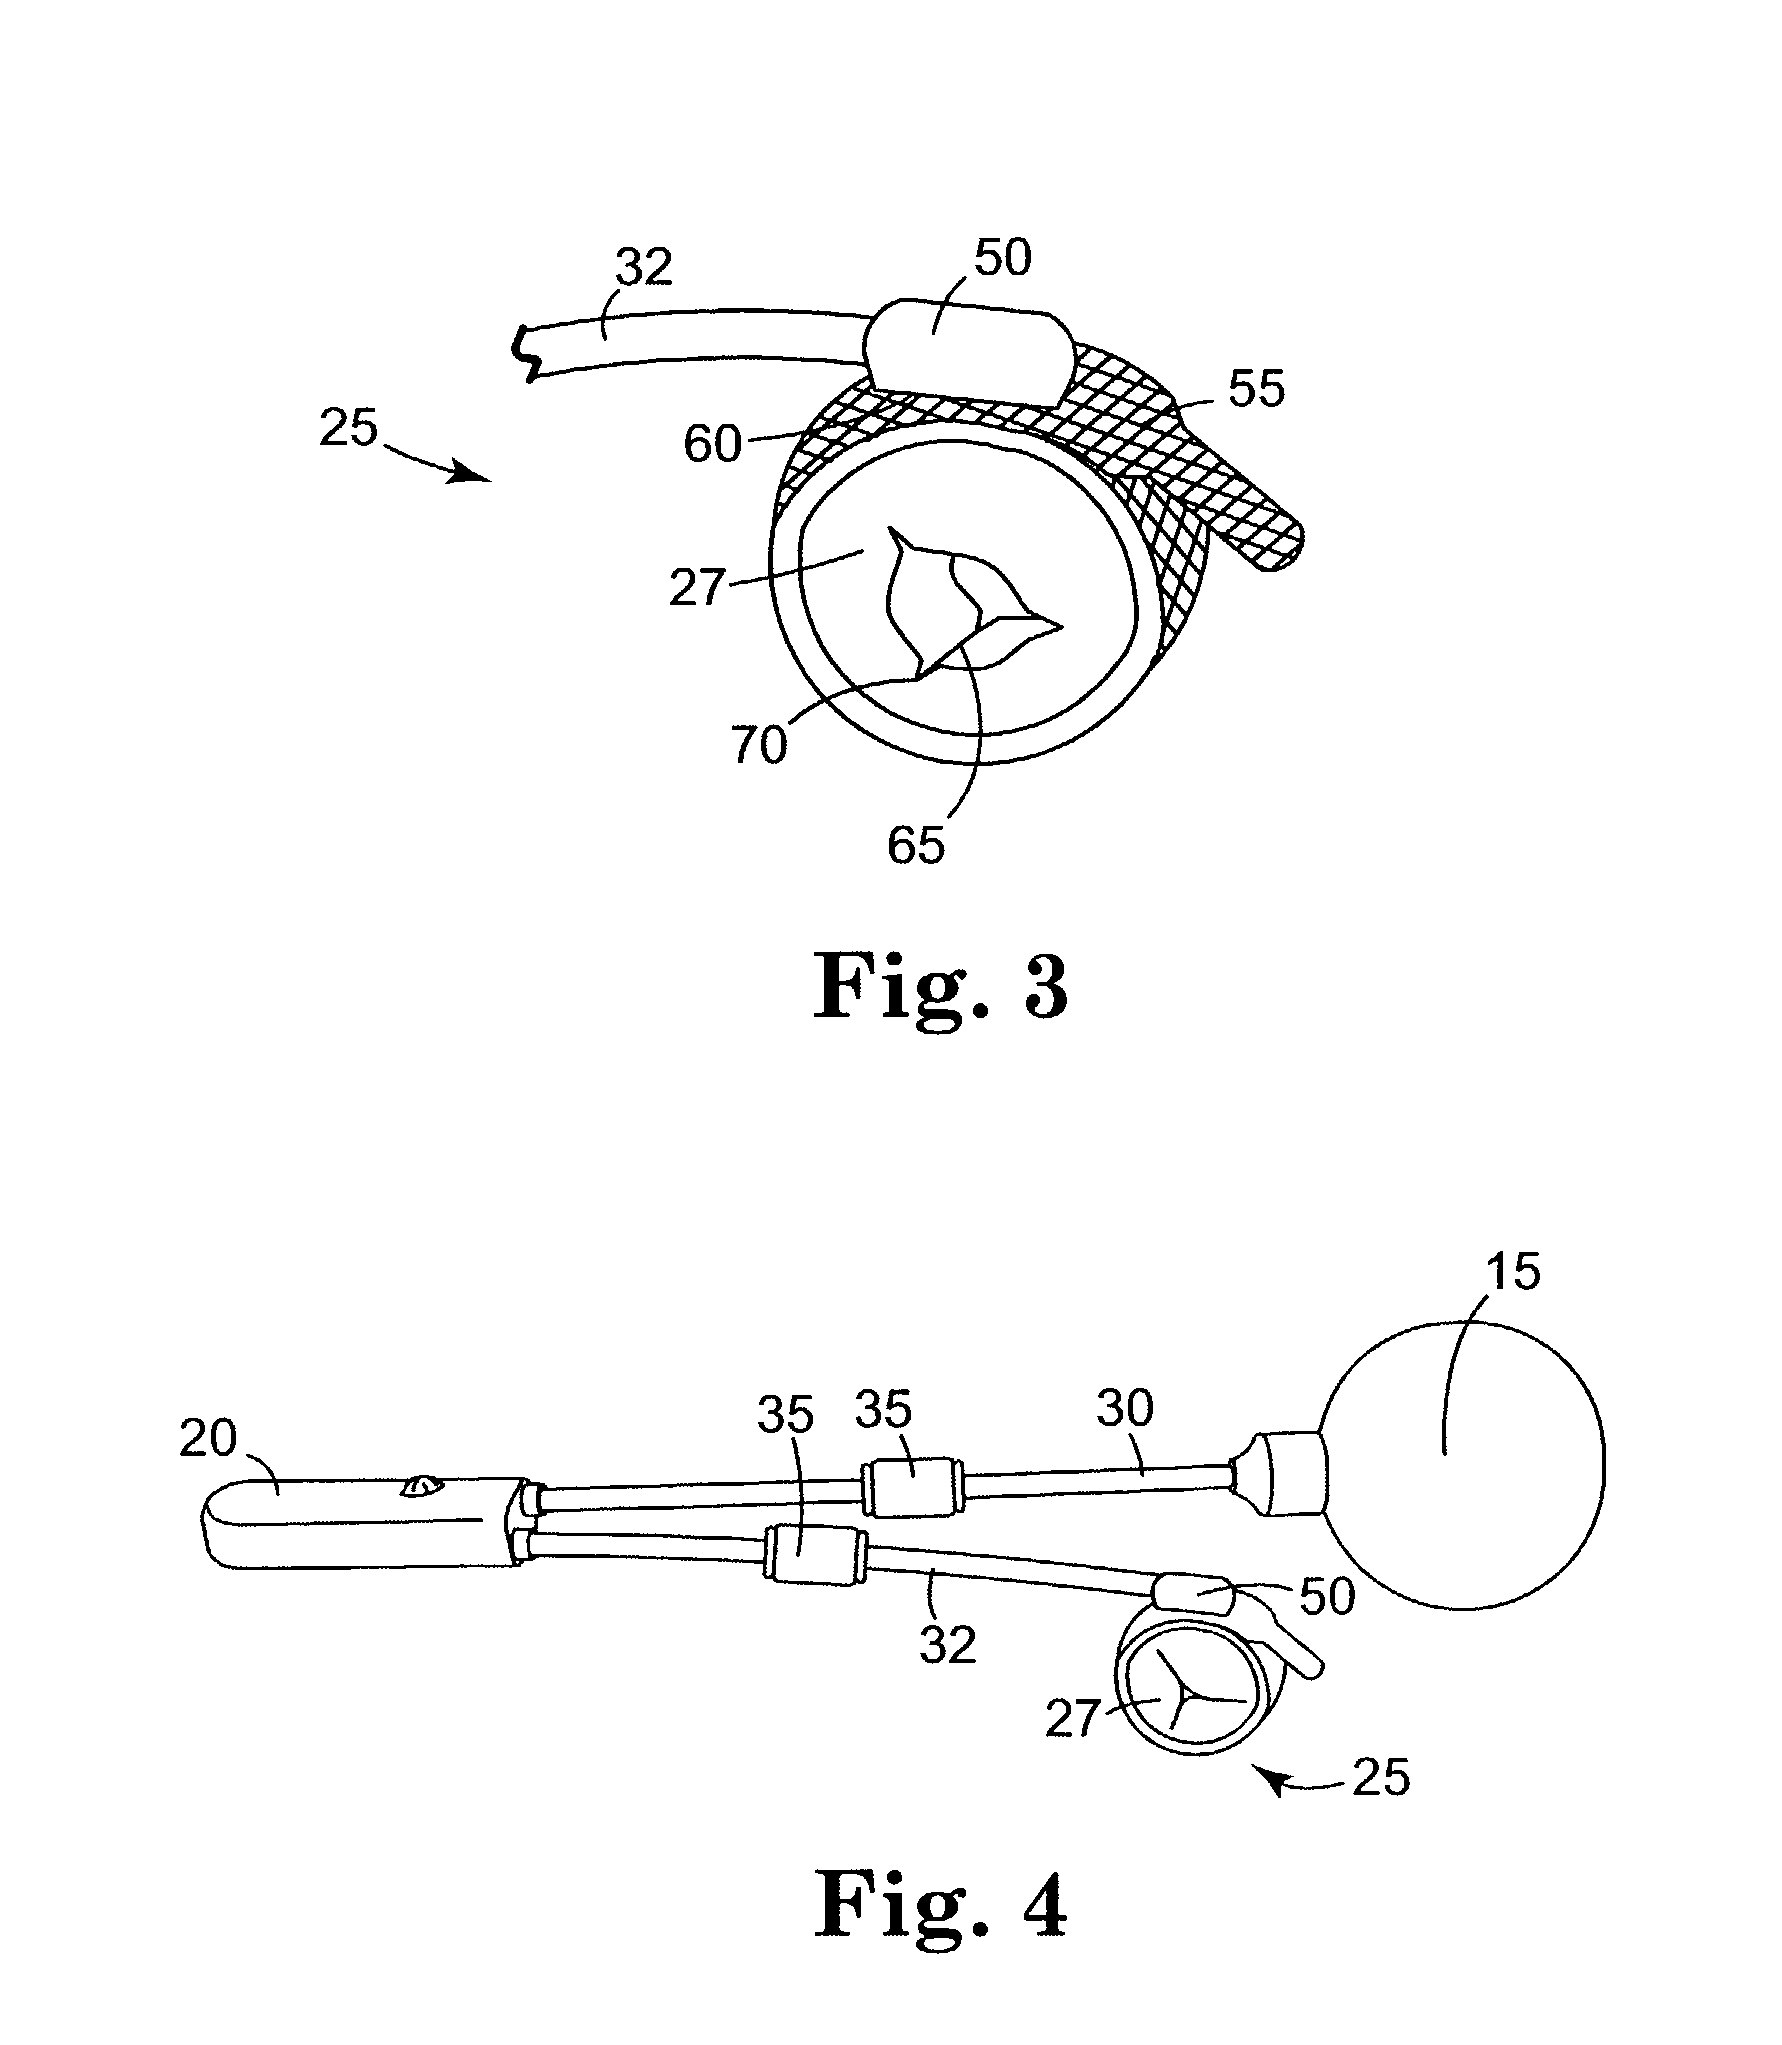 Parylene coated components for artificial sphincters